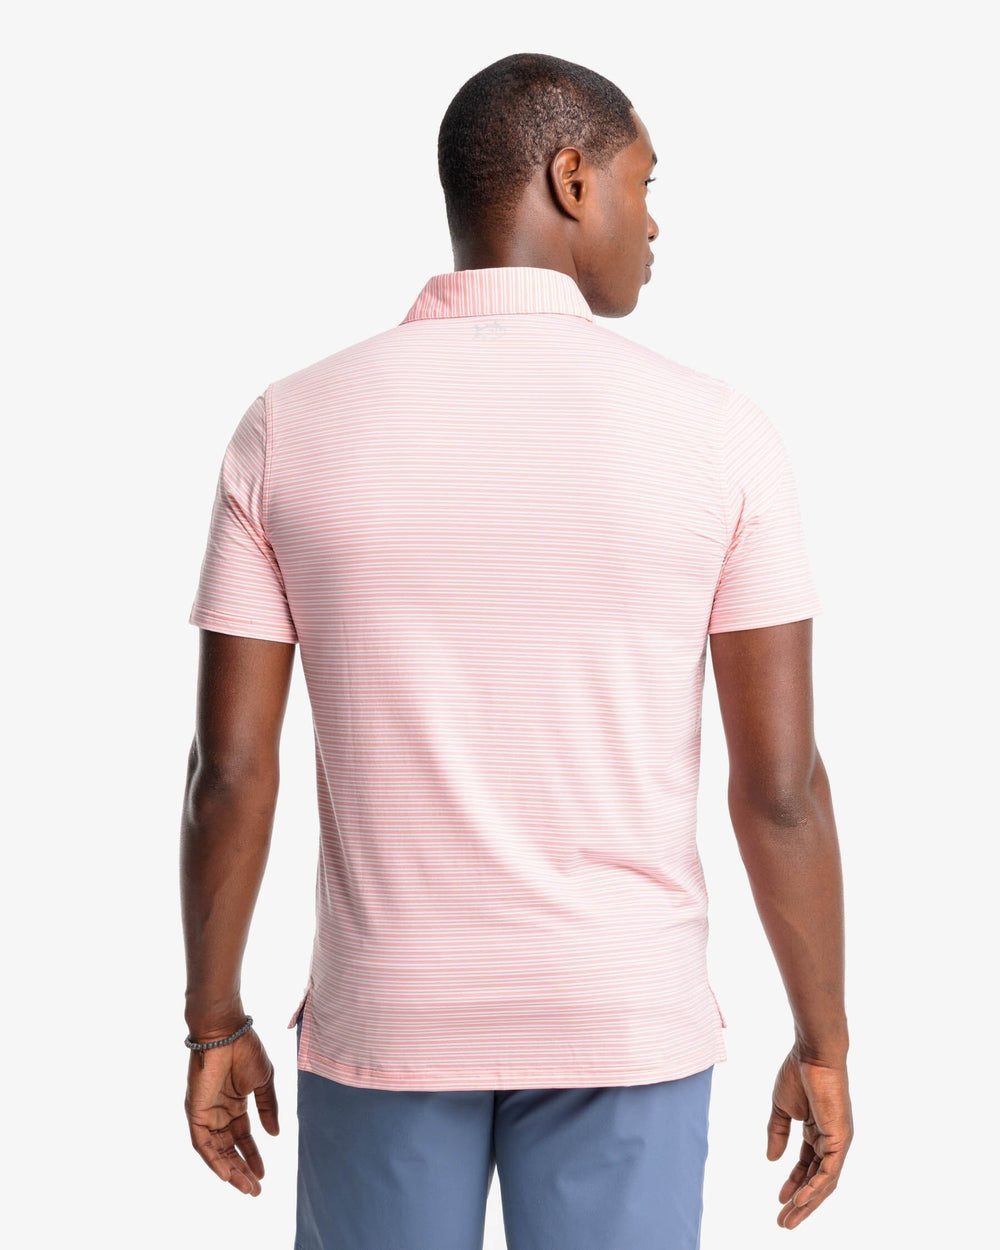 The back view of the Southern Tide brrr-eeze Millwood Stripe Performance Polo Shirt by Southern Tide - Flamingo Pink